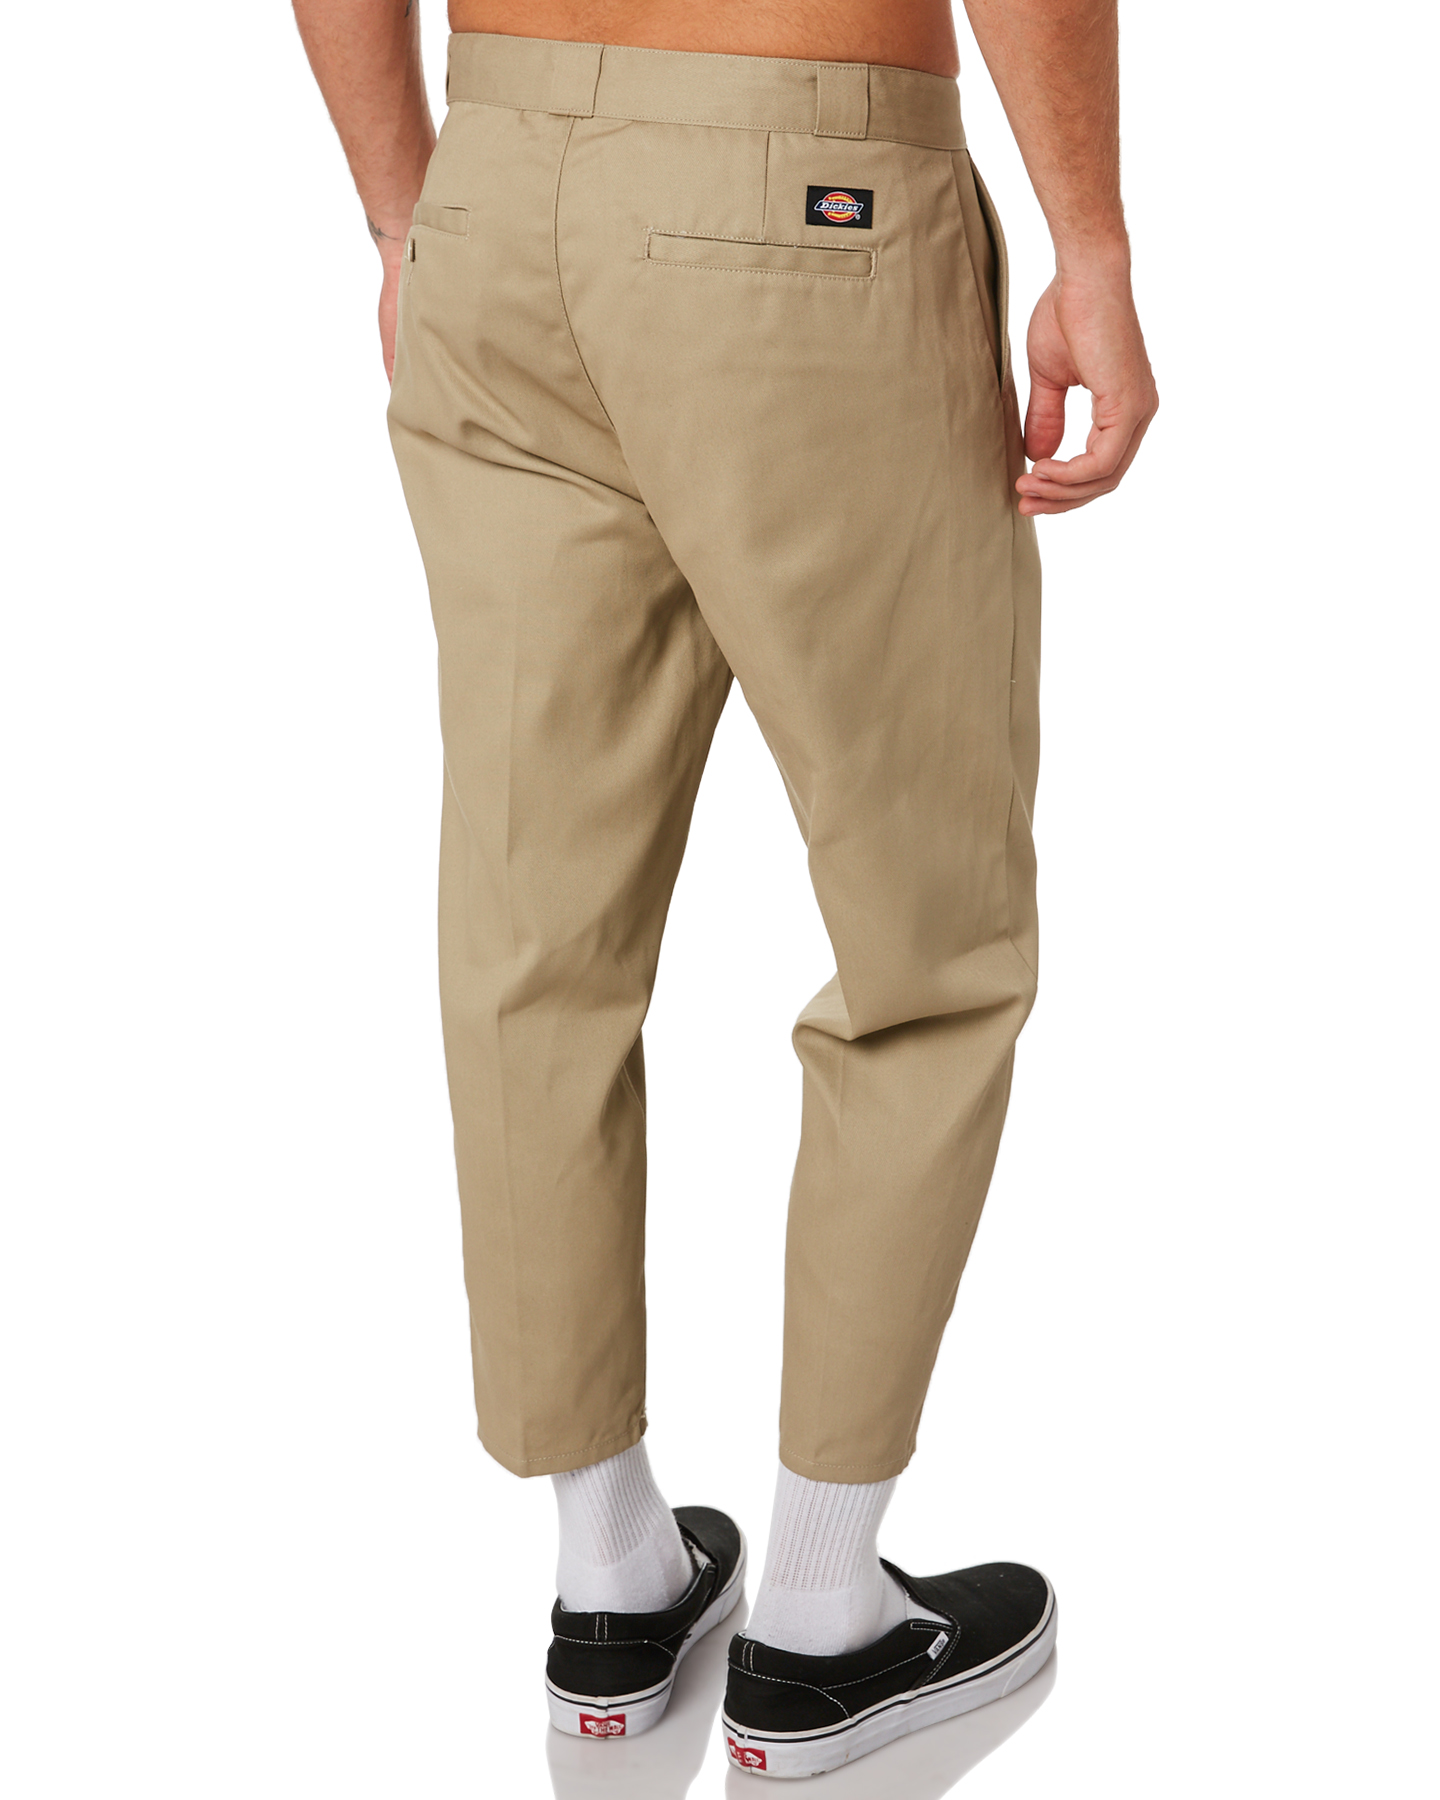 Dickies Wp212 Cropped Mens Pant - Khaki | SurfStitch